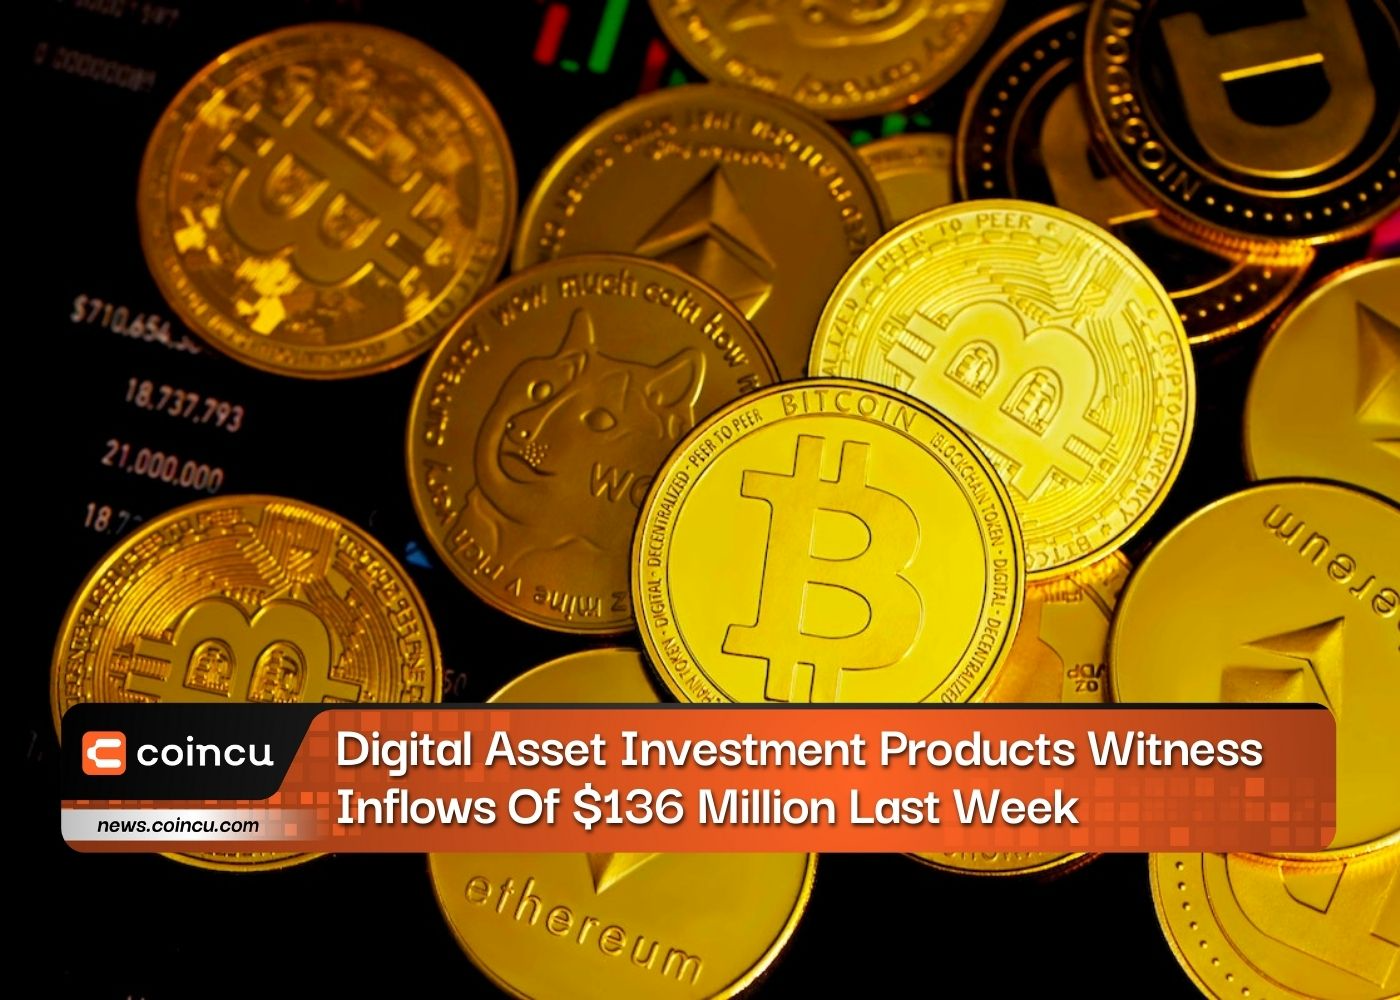 Digital Asset Investment Products Witness Inflows Of $136 Million Last Week - CoinCu News